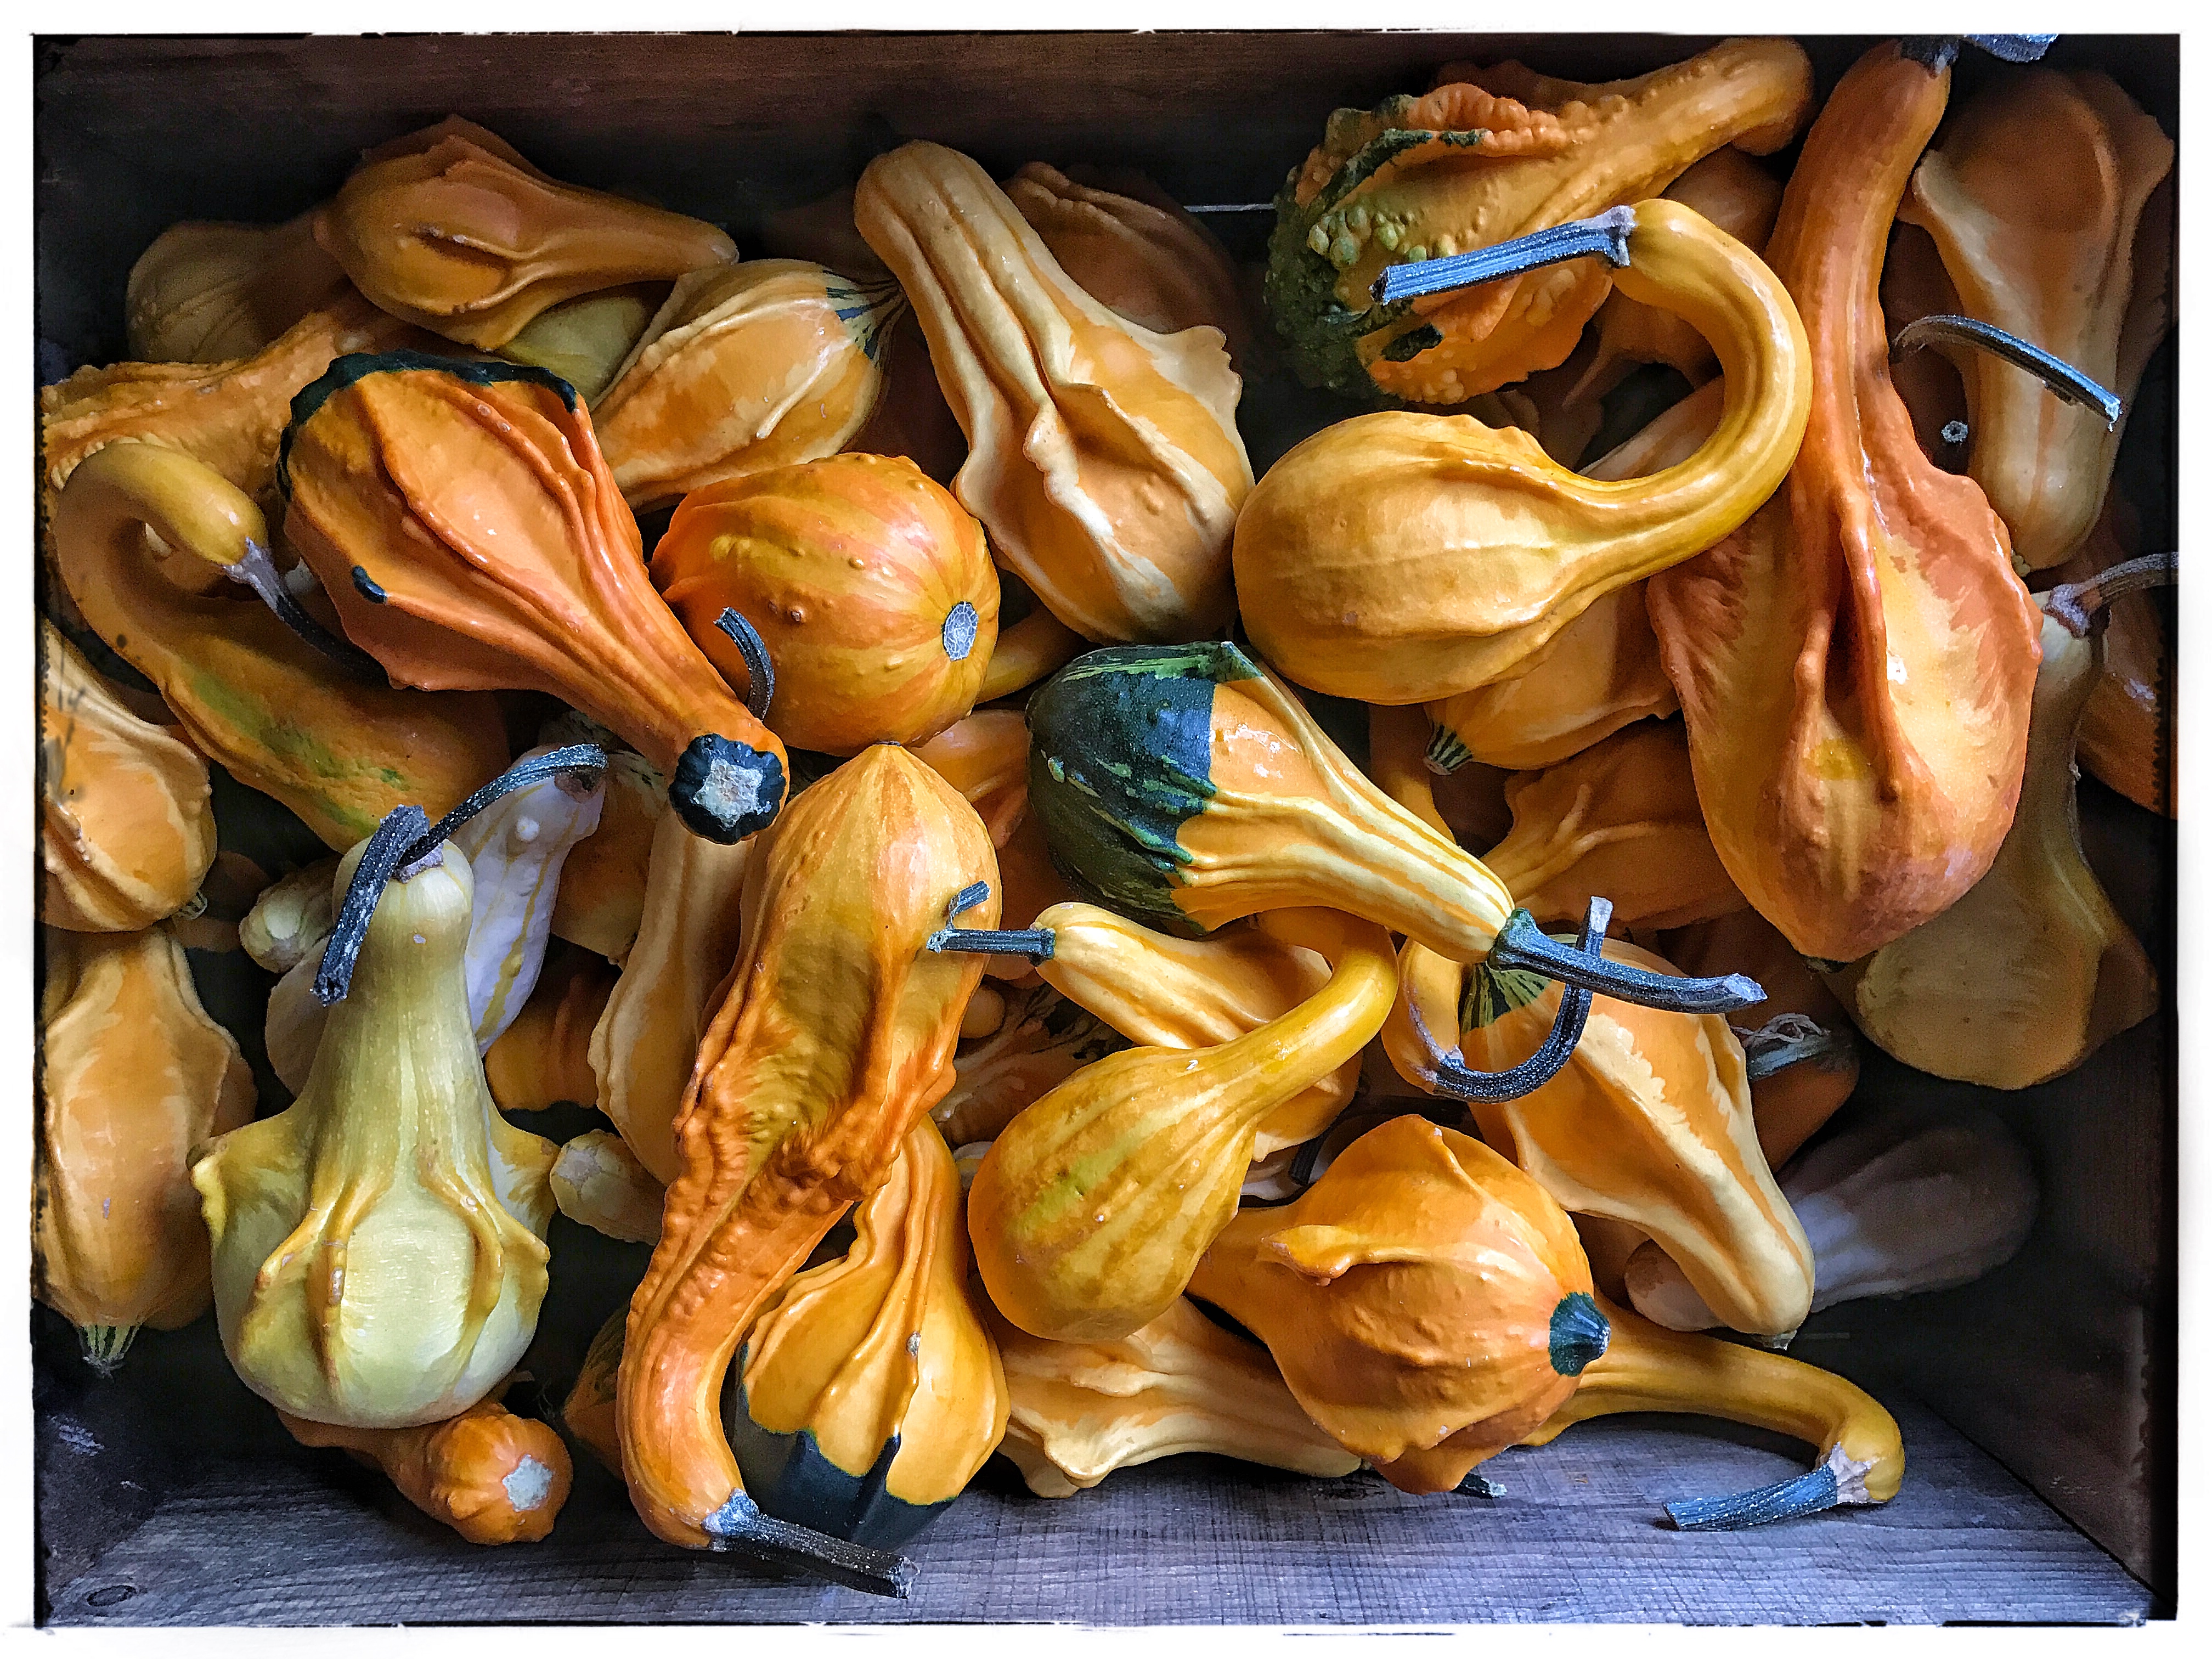 The Gourds